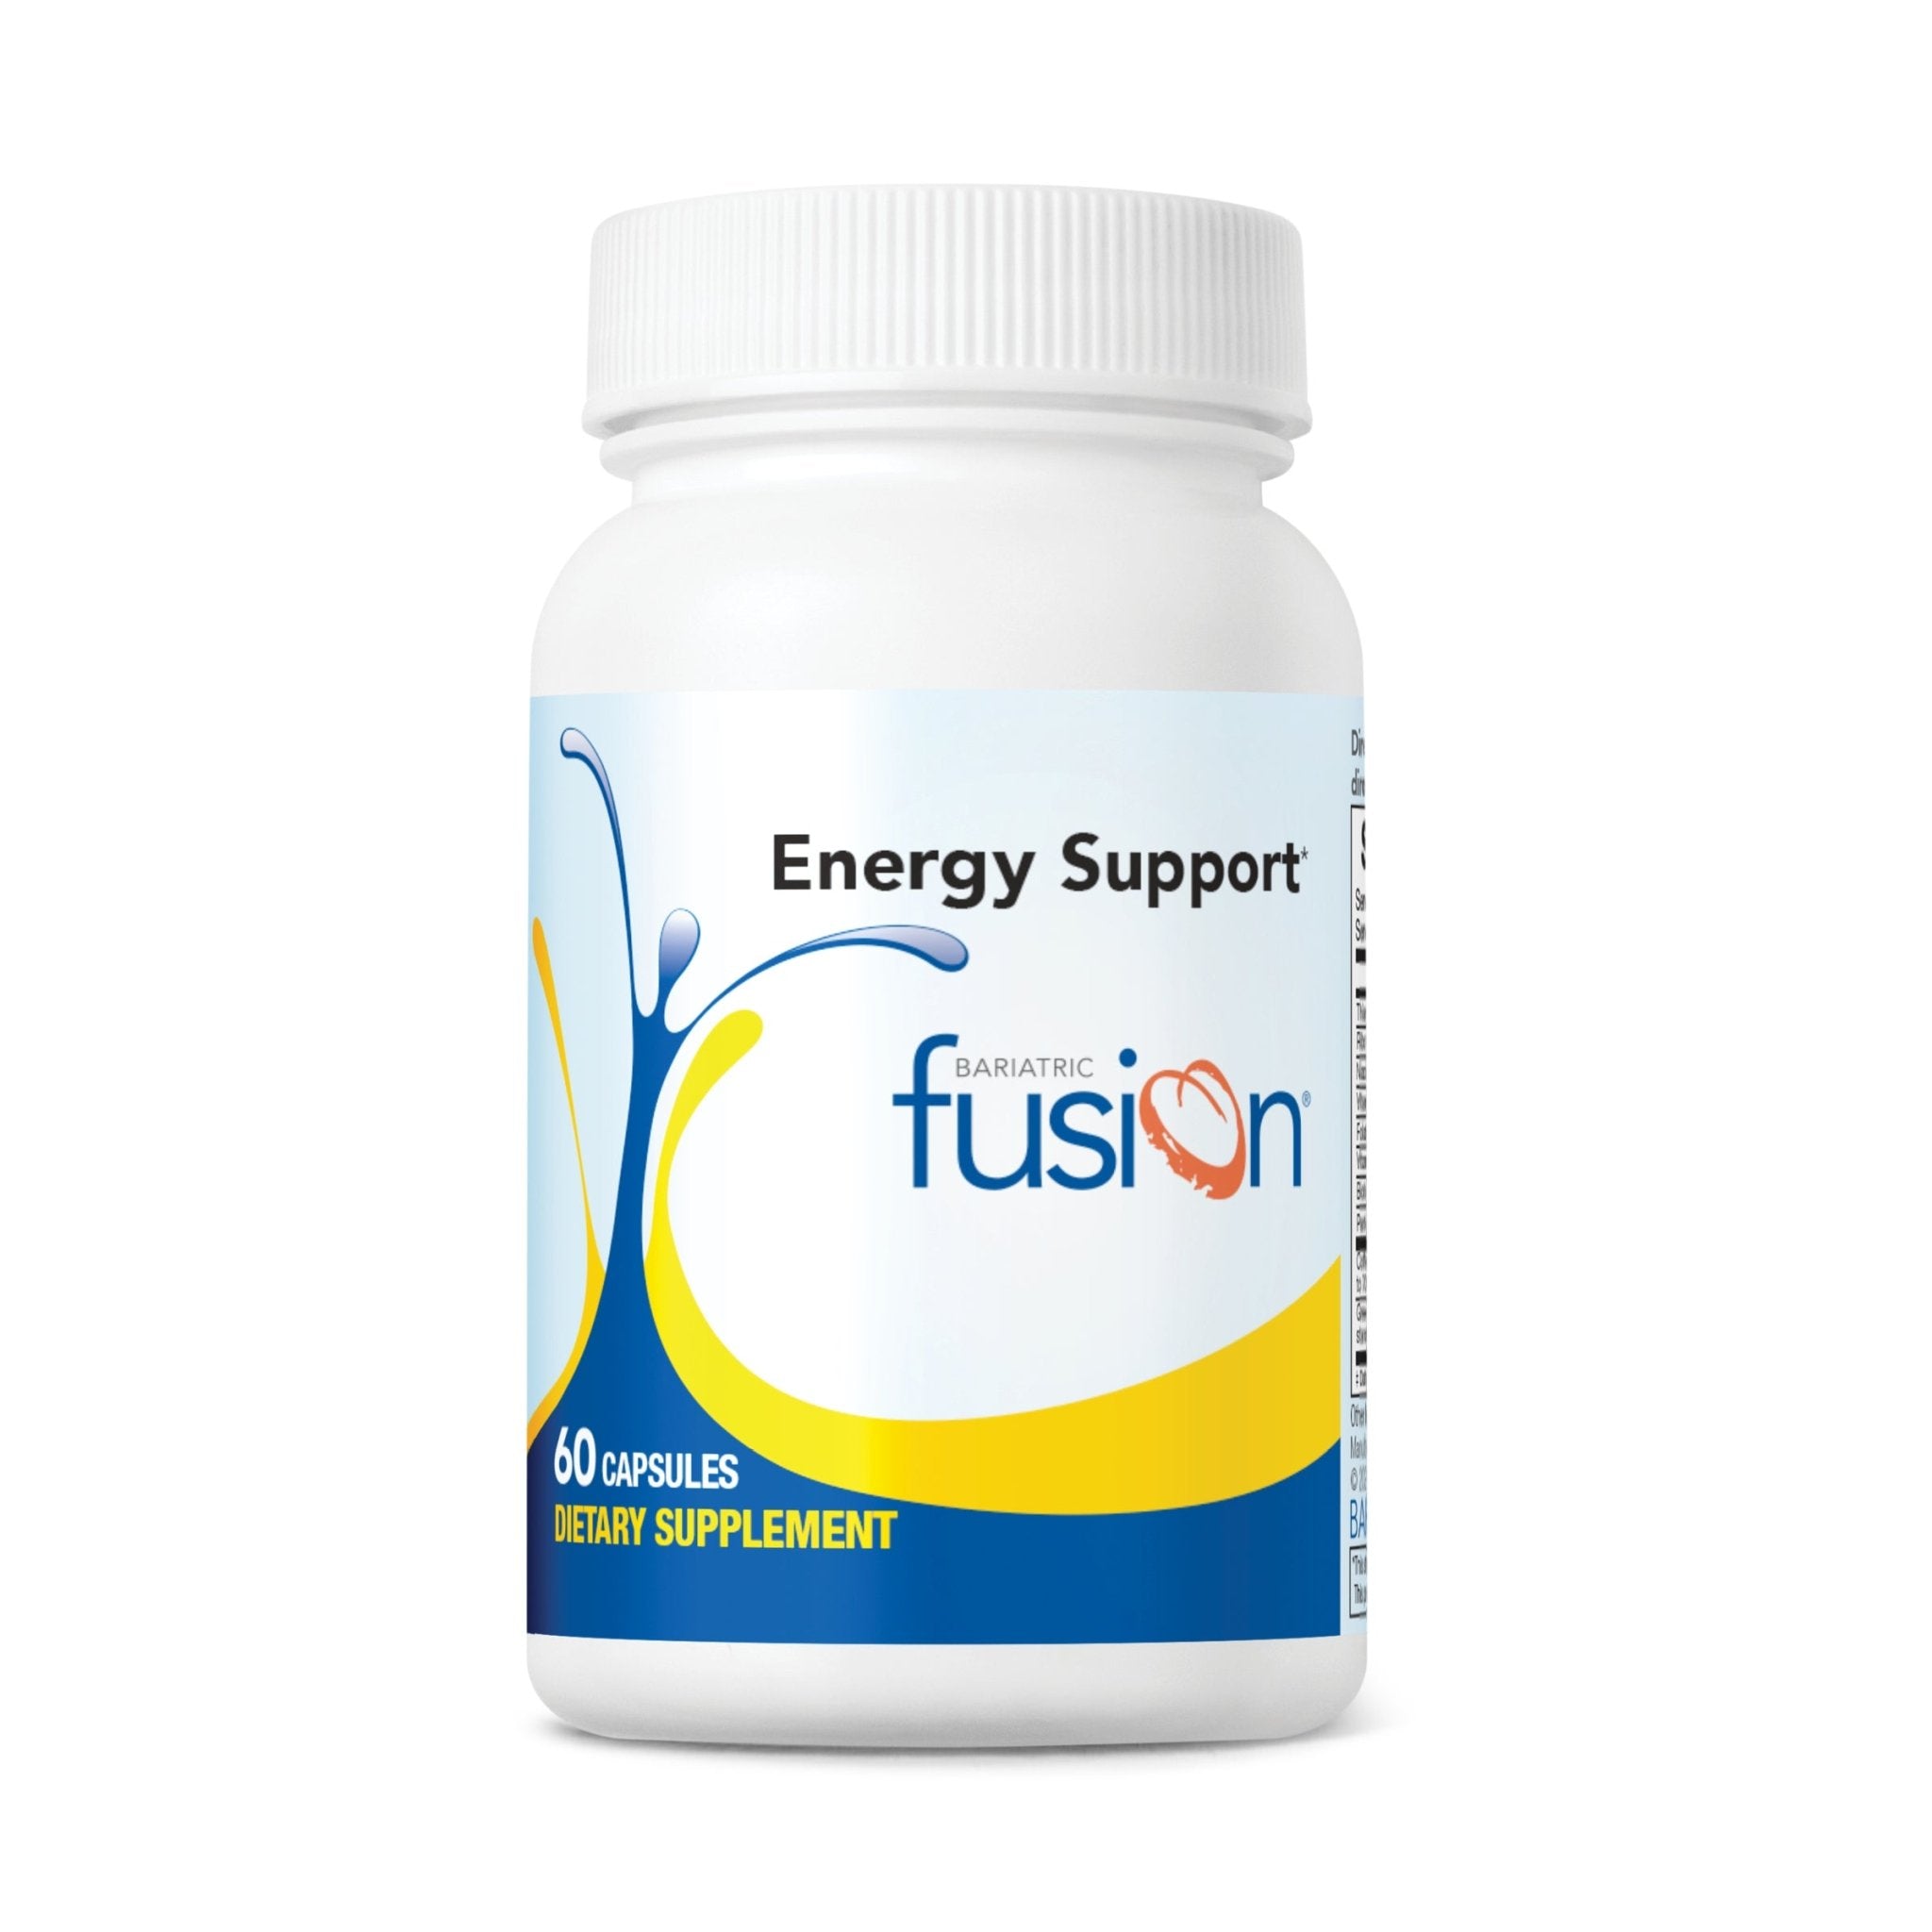 Energy Support* - Bariatric Fusion